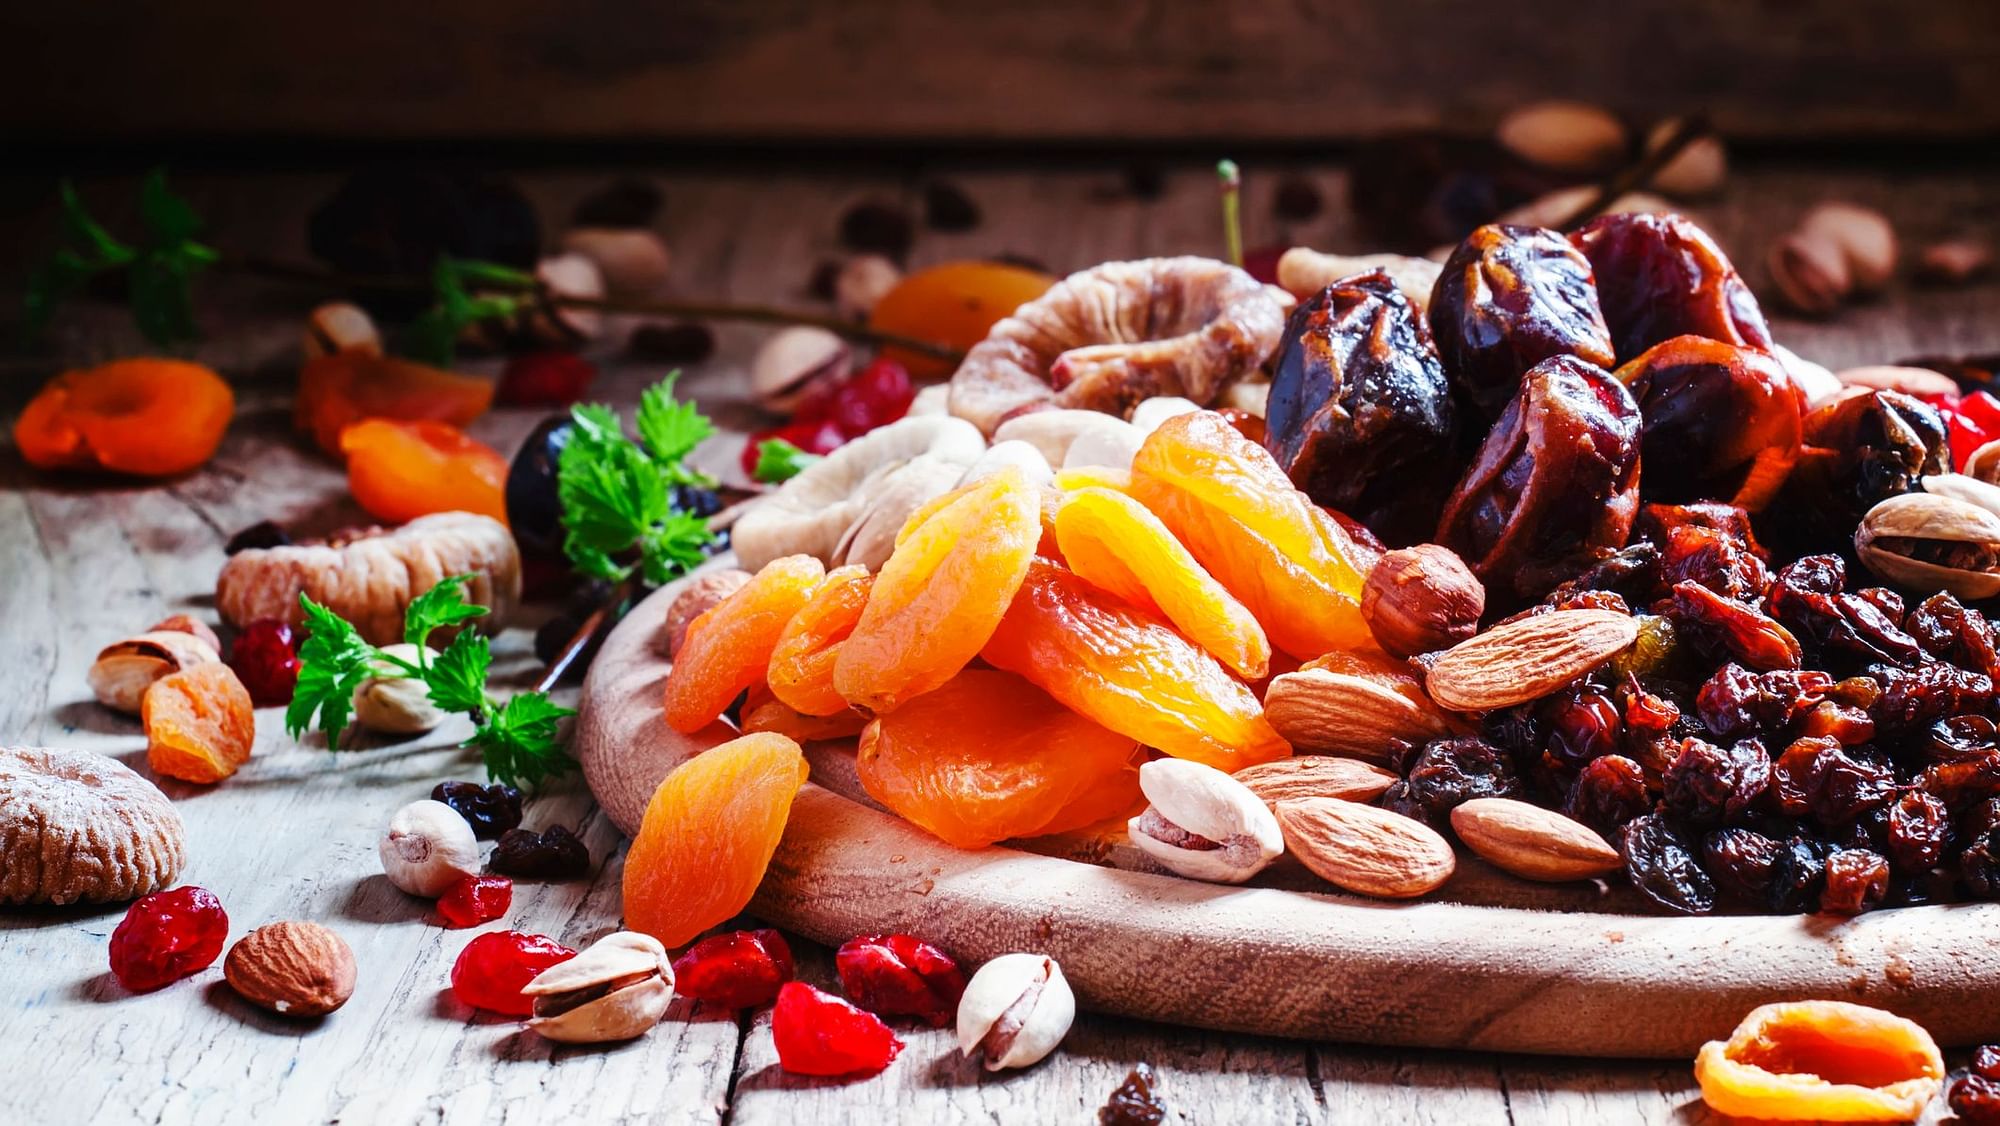 Eating dried fruits such as dates, apricots, raisins and sultanas may not spike blood sugar compared to starchy foods such as white bread, suggests a study.